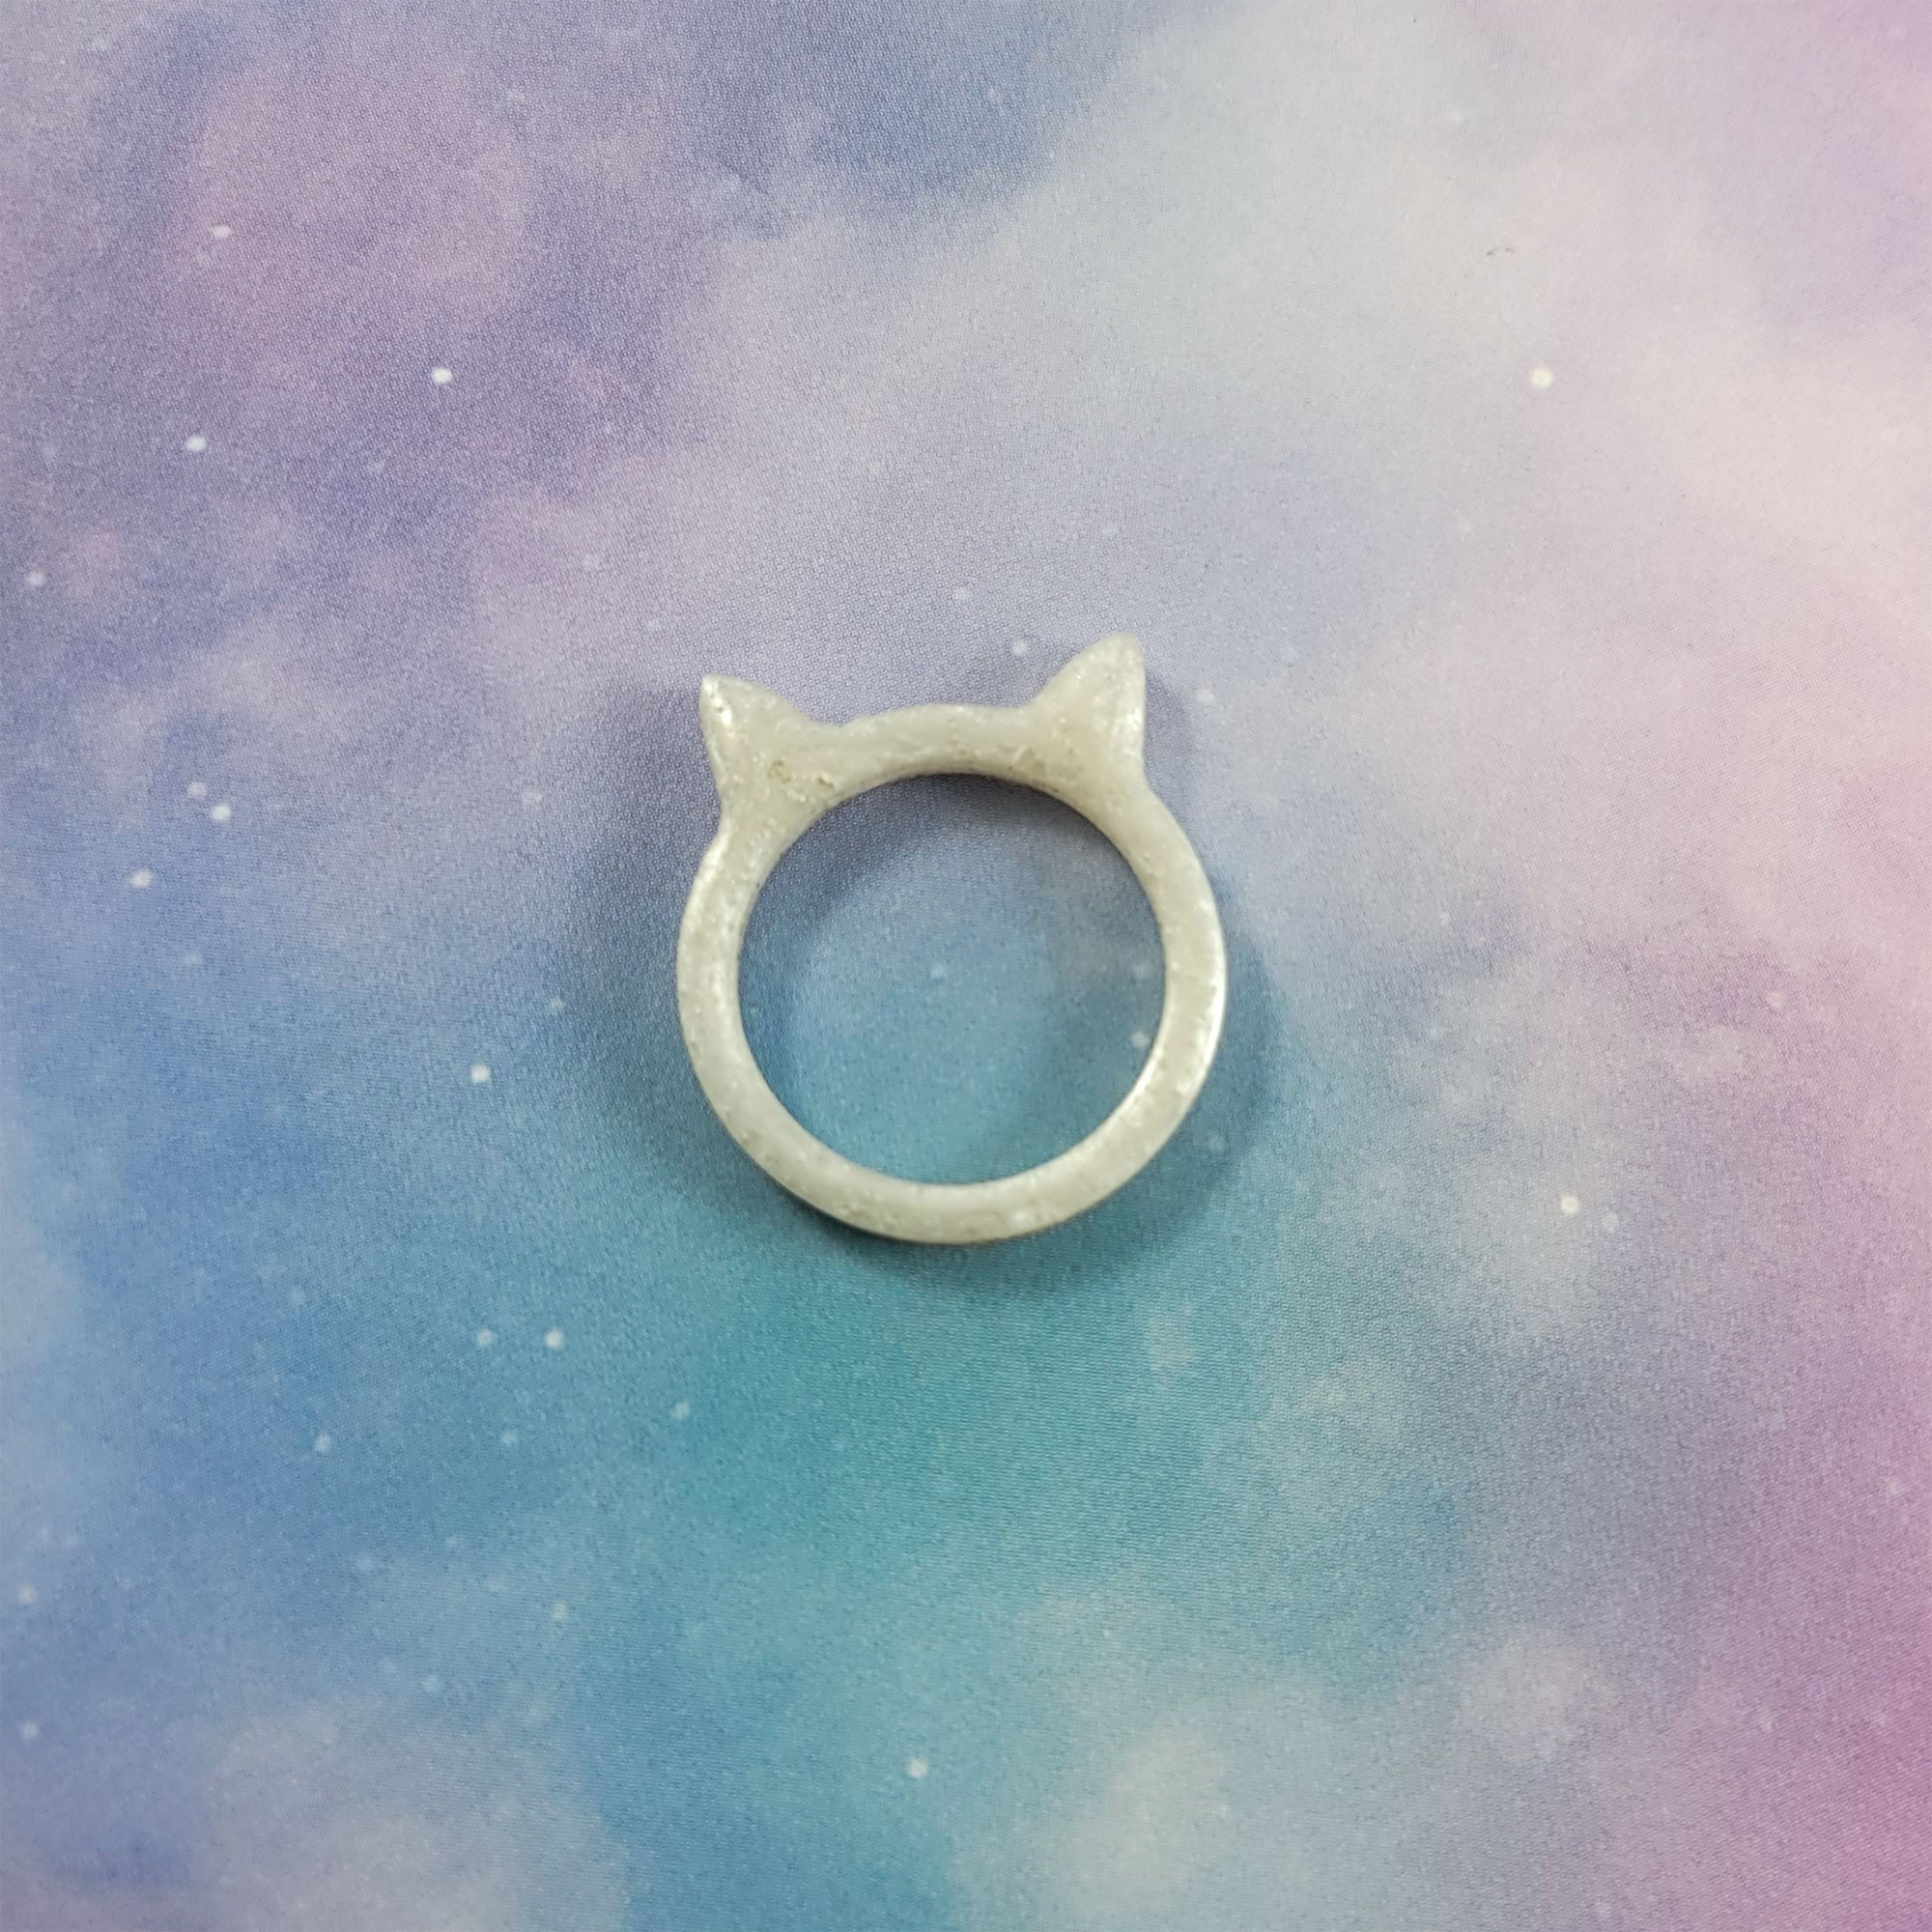 White Kawaii Kitty Ring by Wilde Designs